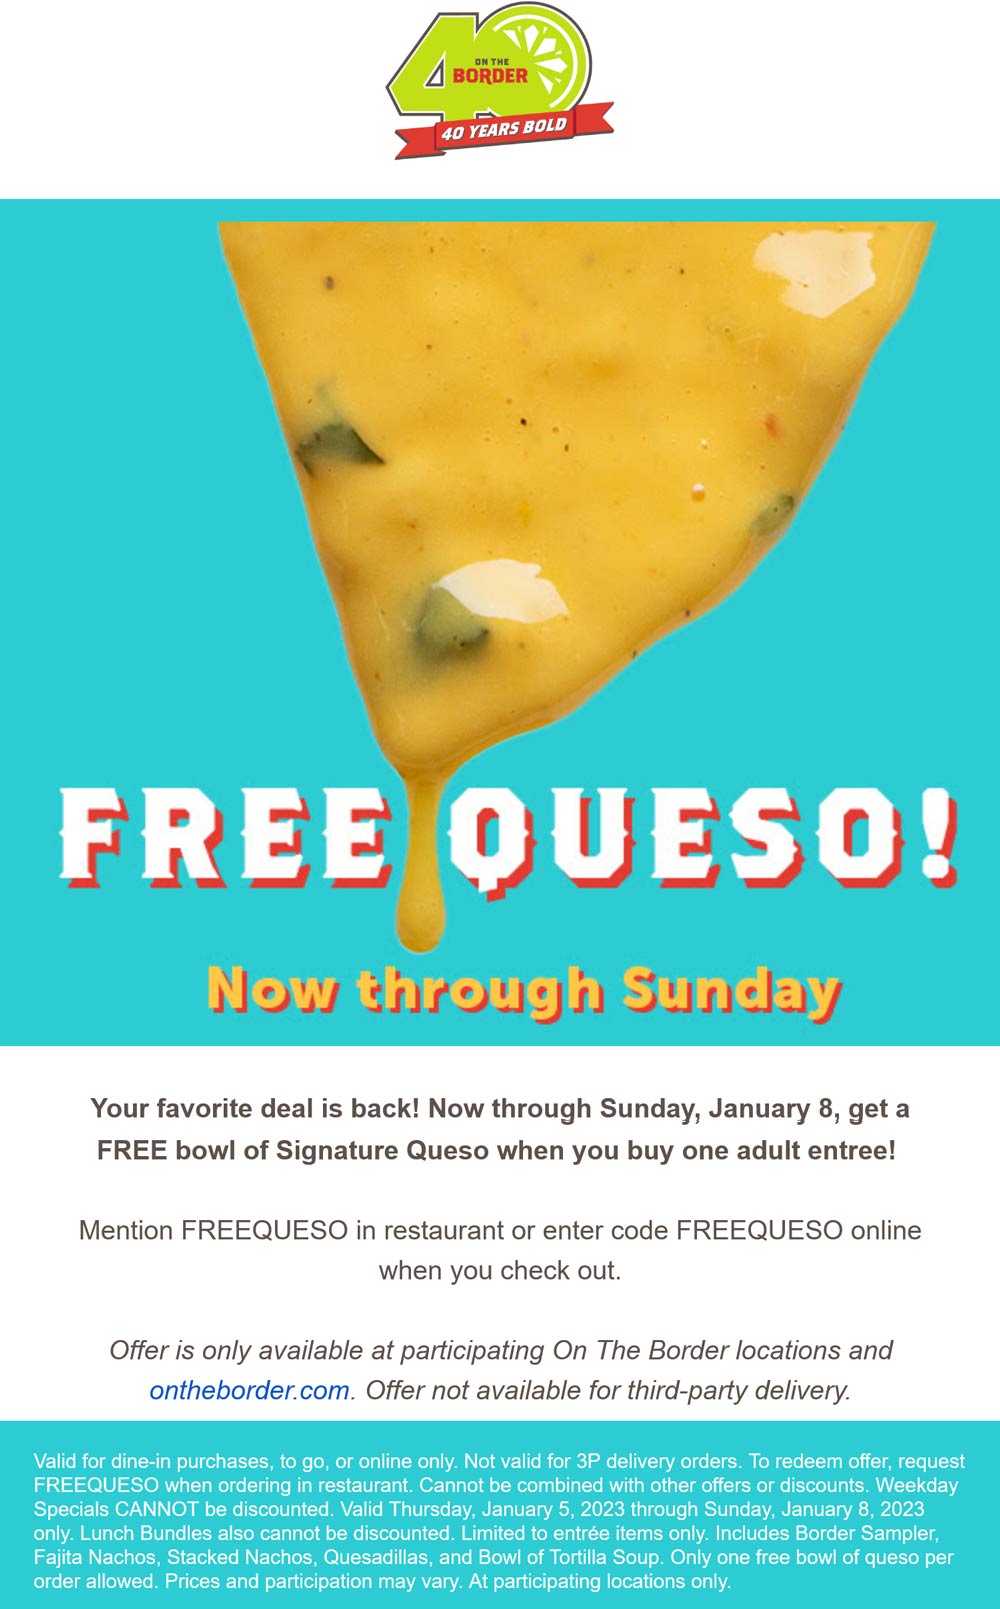 On The Border restaurants Coupon  Free queso at On The Border restaurants via promo code FREEQUESO #ontheborder 